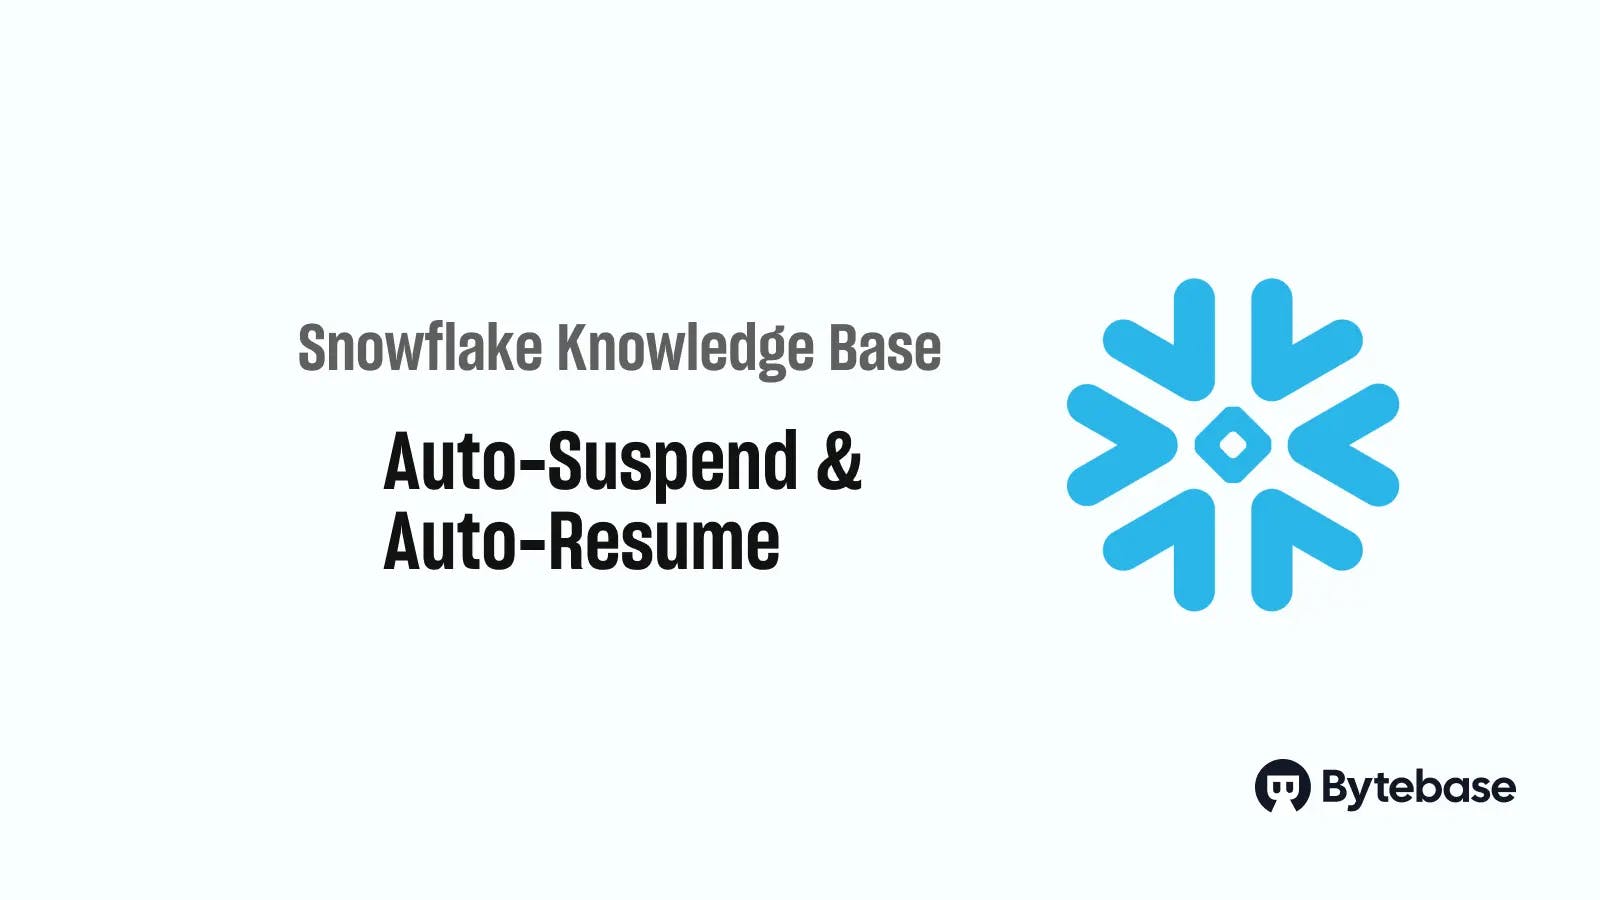 What is Snowflake Auto-Suspend and Auto-Resume?